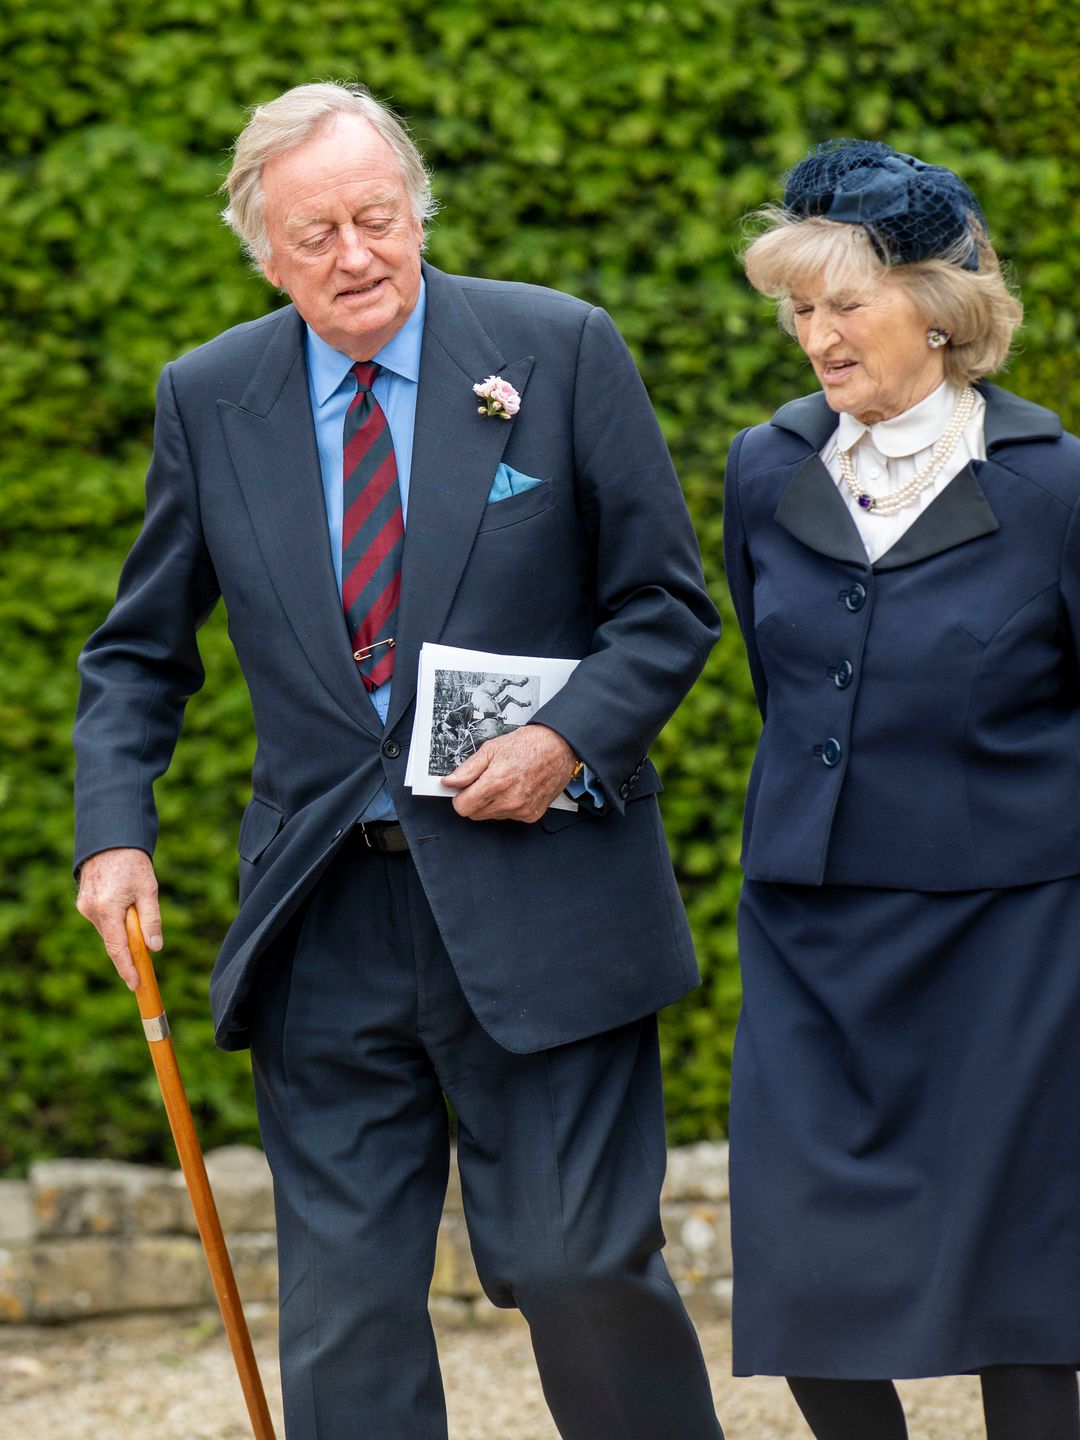 Andrew Parker Bowles walking with the help of a stick and a woman